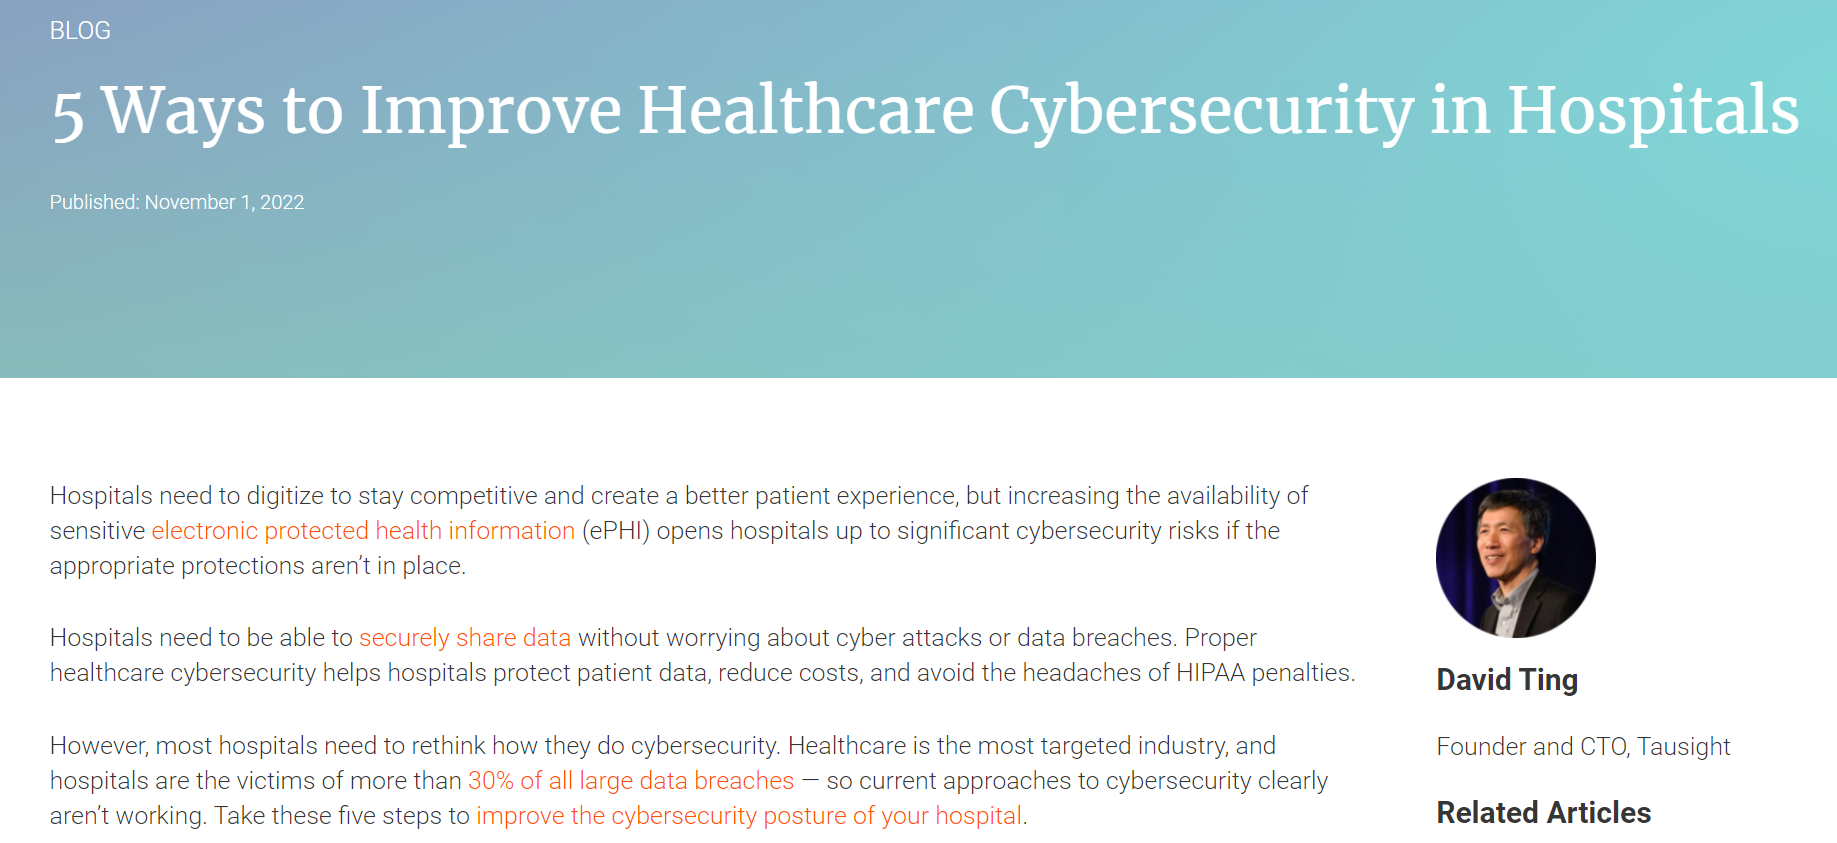 5 Ways to Improve Healthcare Cybersecurity in Hospitals